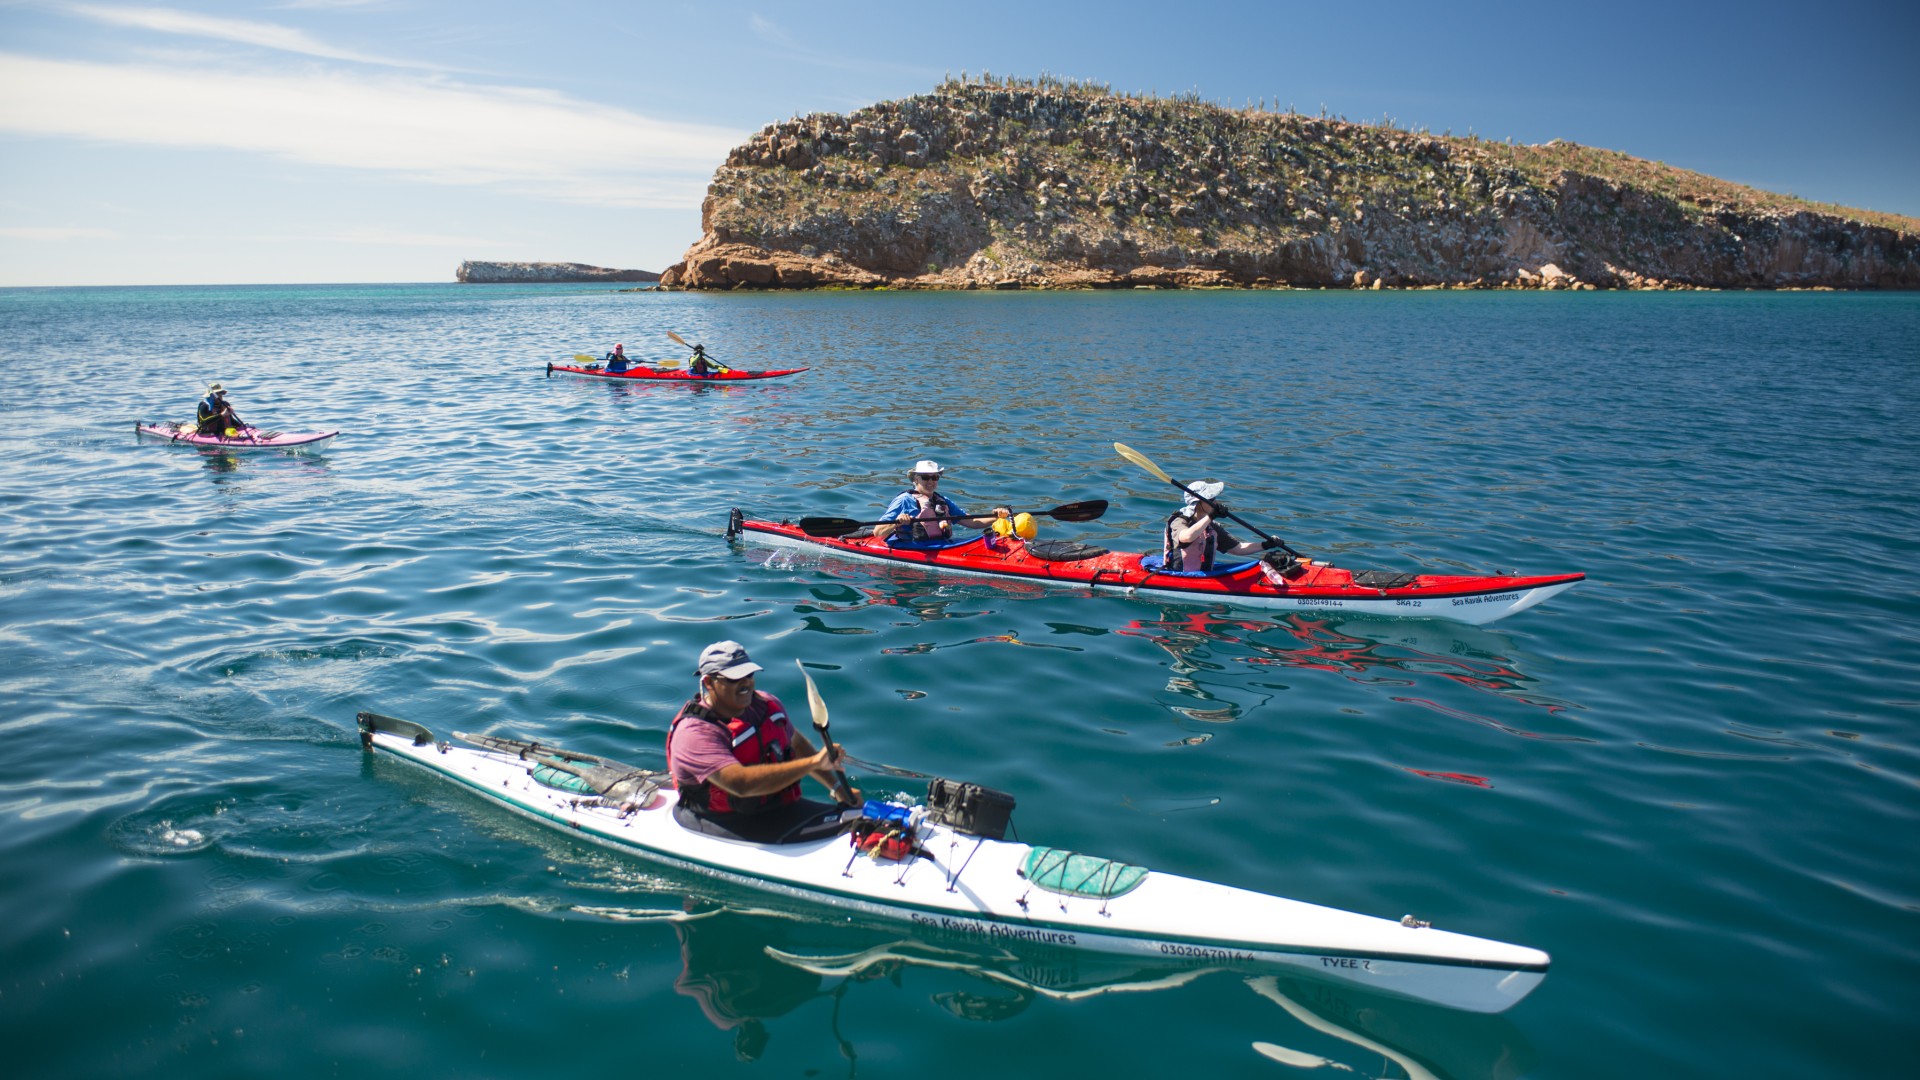 Kayakers smiling at the camera as they paddle down the Baja California Sur peninsula on the Gulf of California on a sunny day